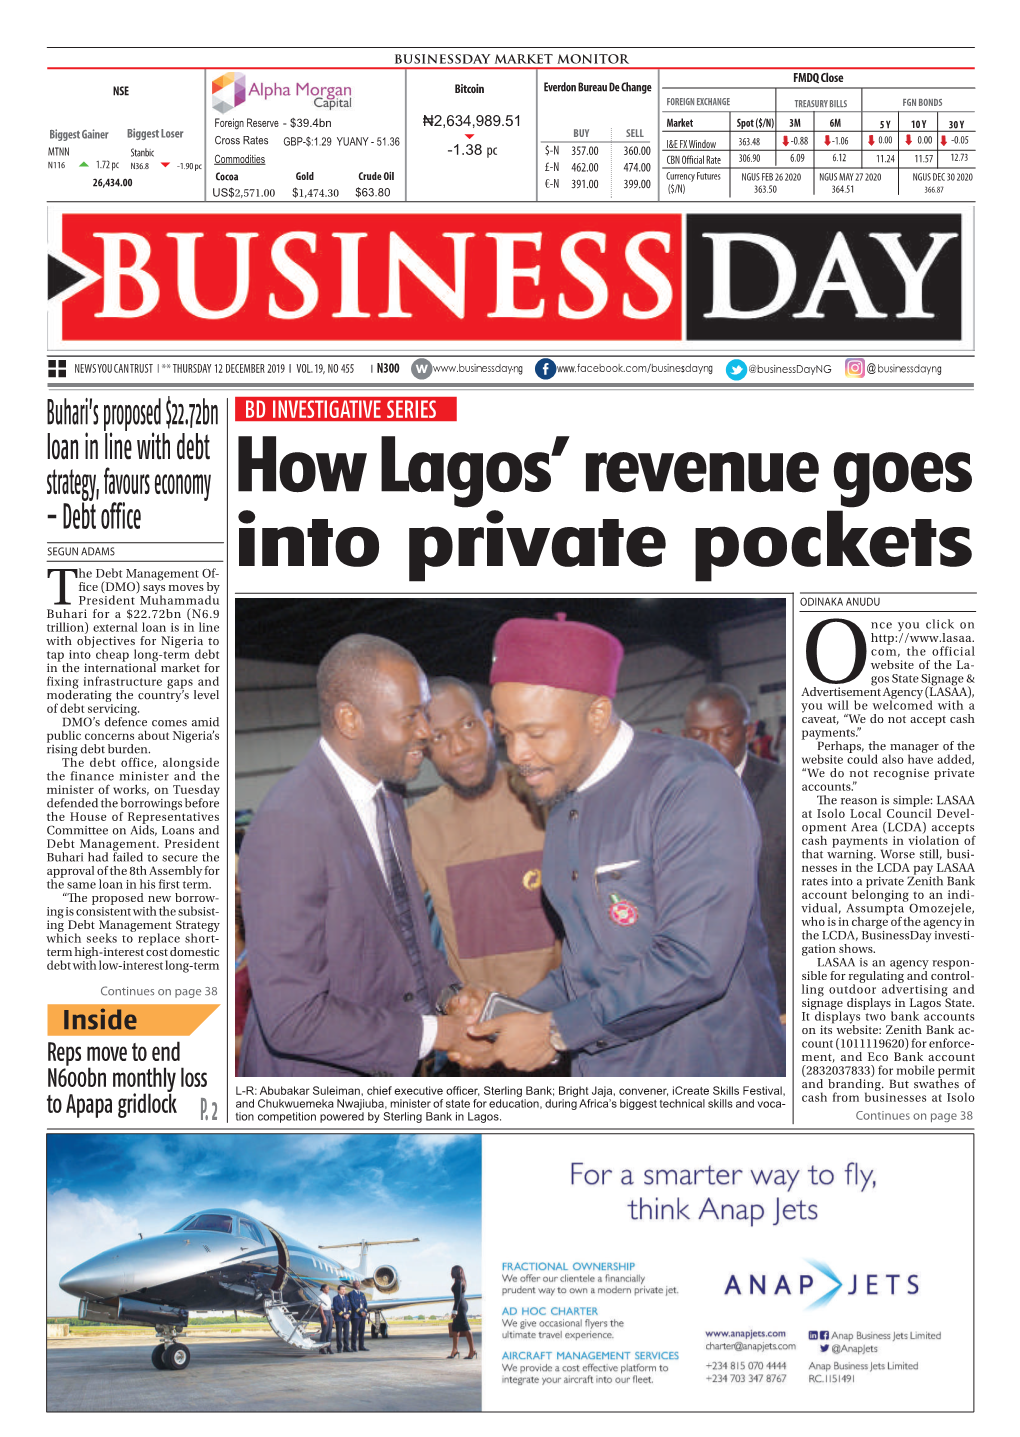 How Lagos' Revenue Goes Into Private Pockets